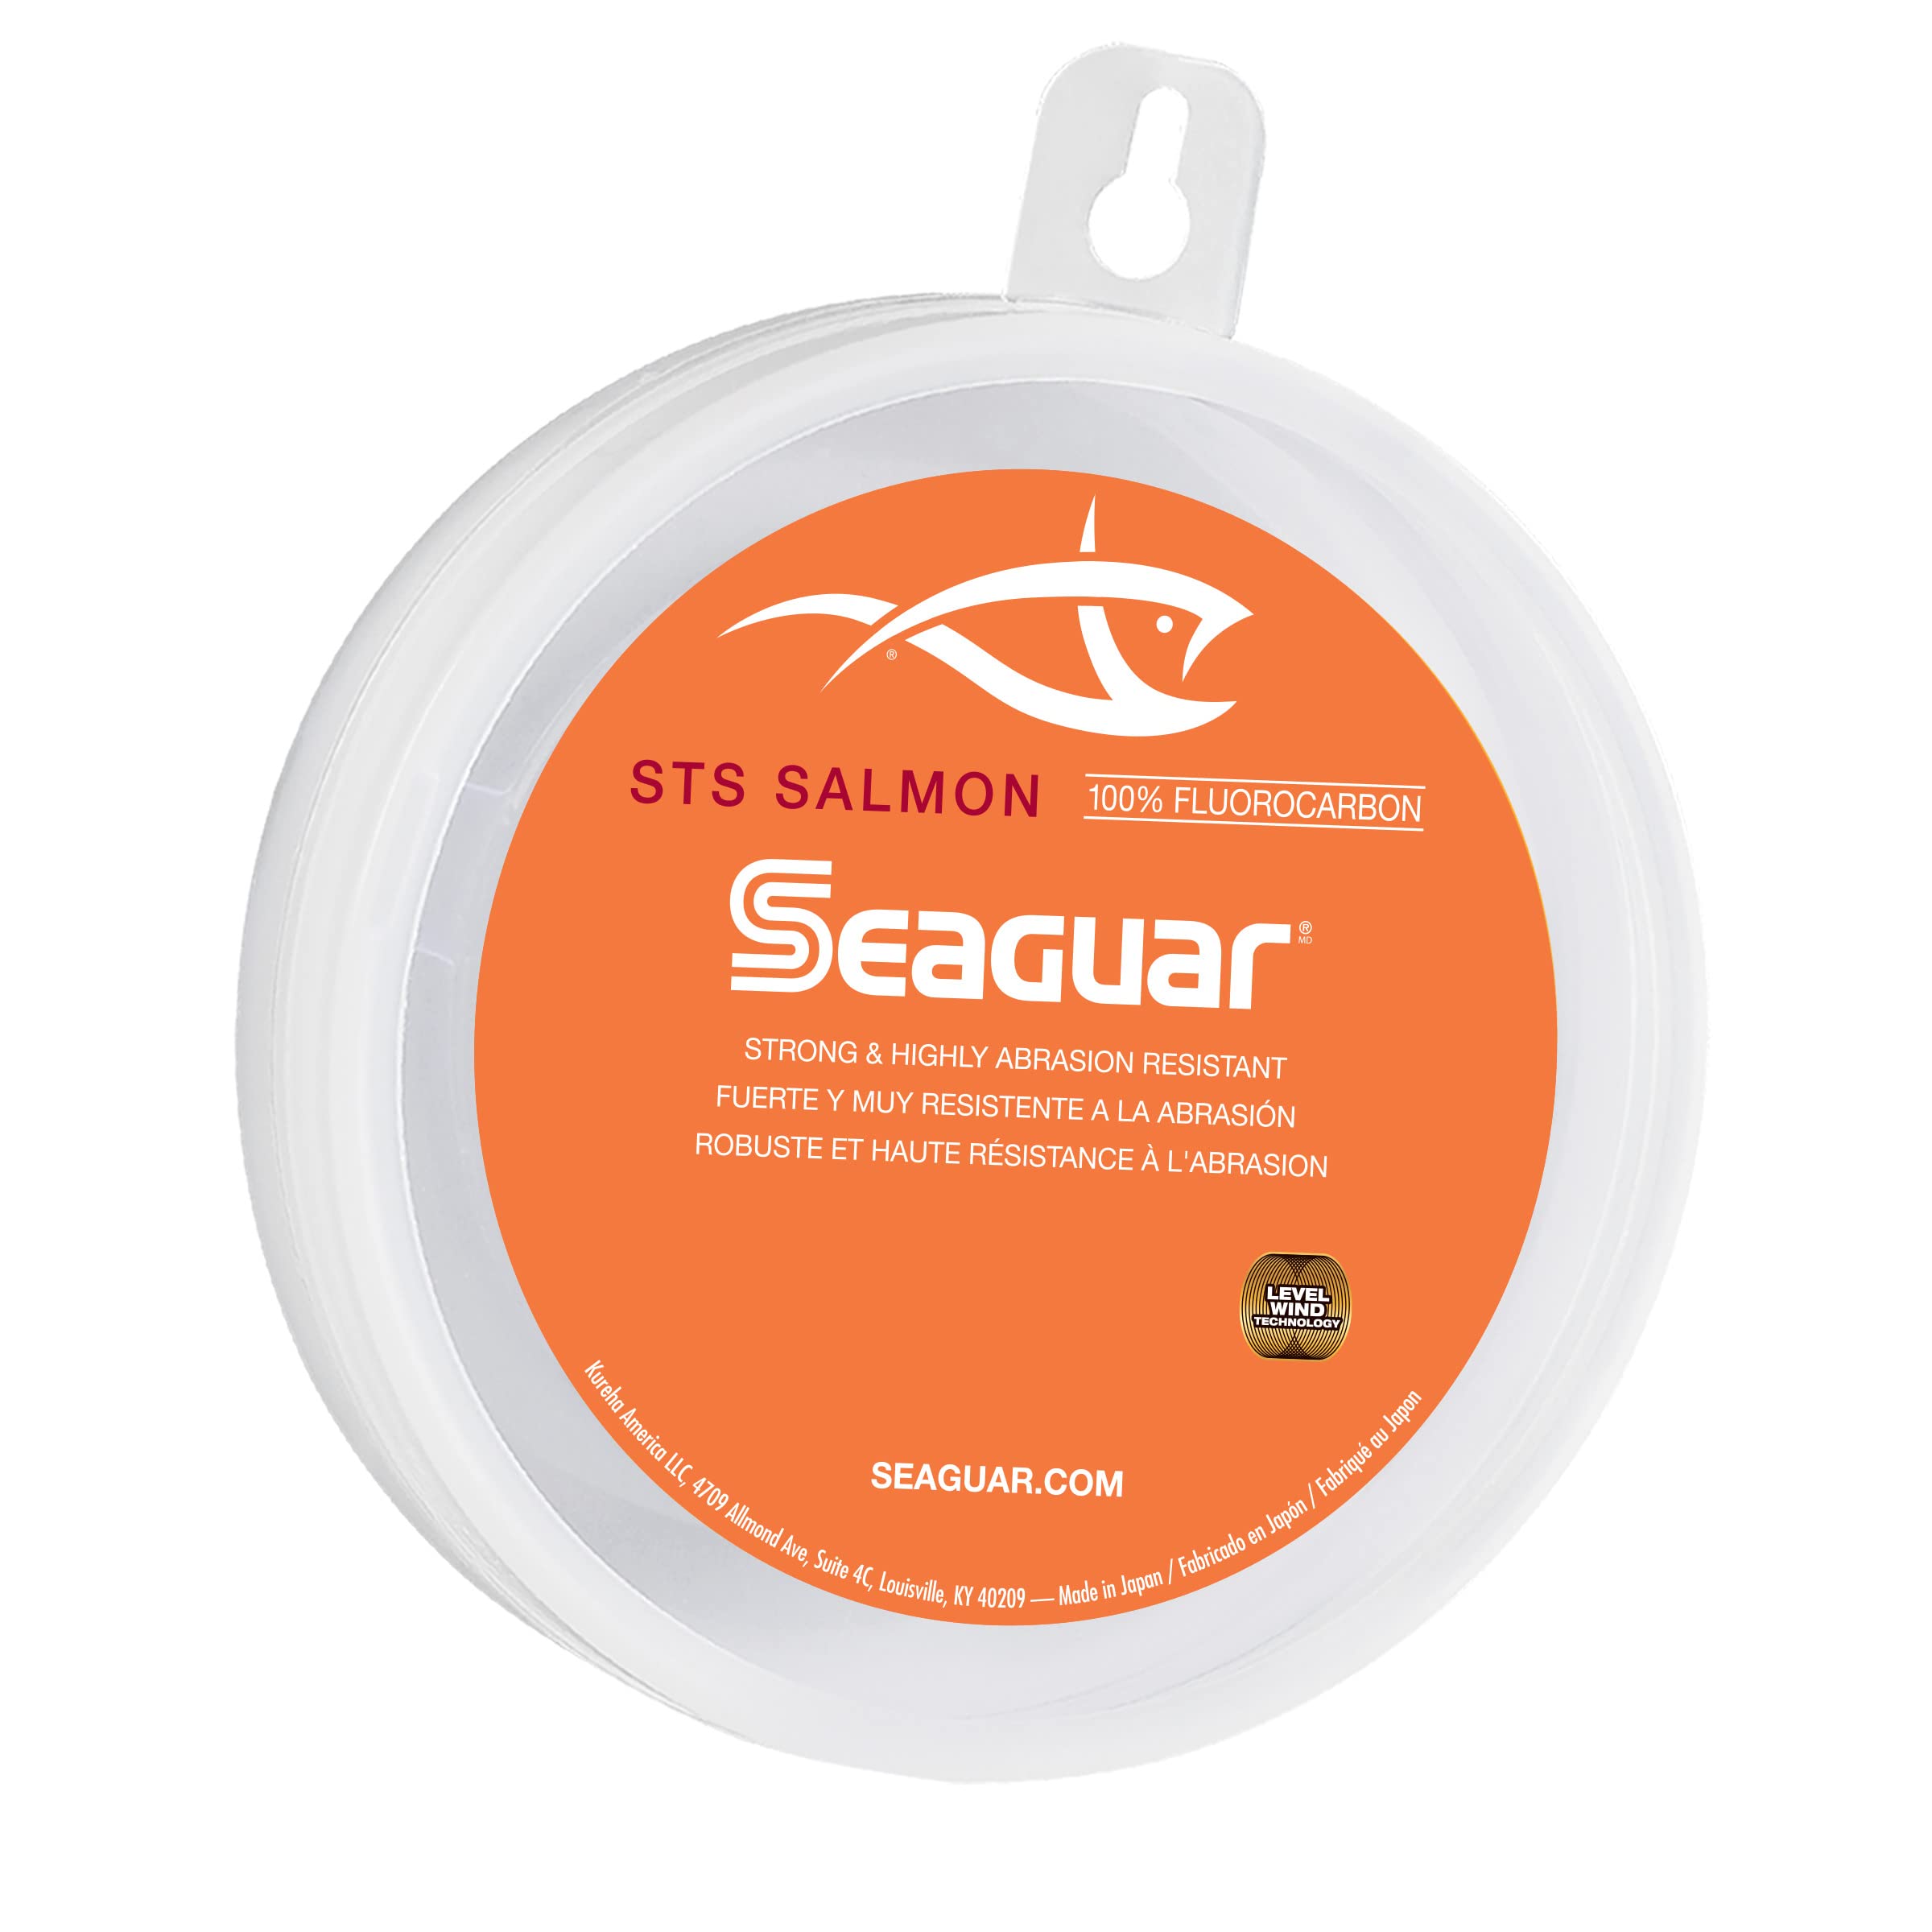 Seaguar STS Salmon Fishing Line, Strong and Abrasion Resistant, Premium  100% Fluorocarbon Performance Fishing Leader